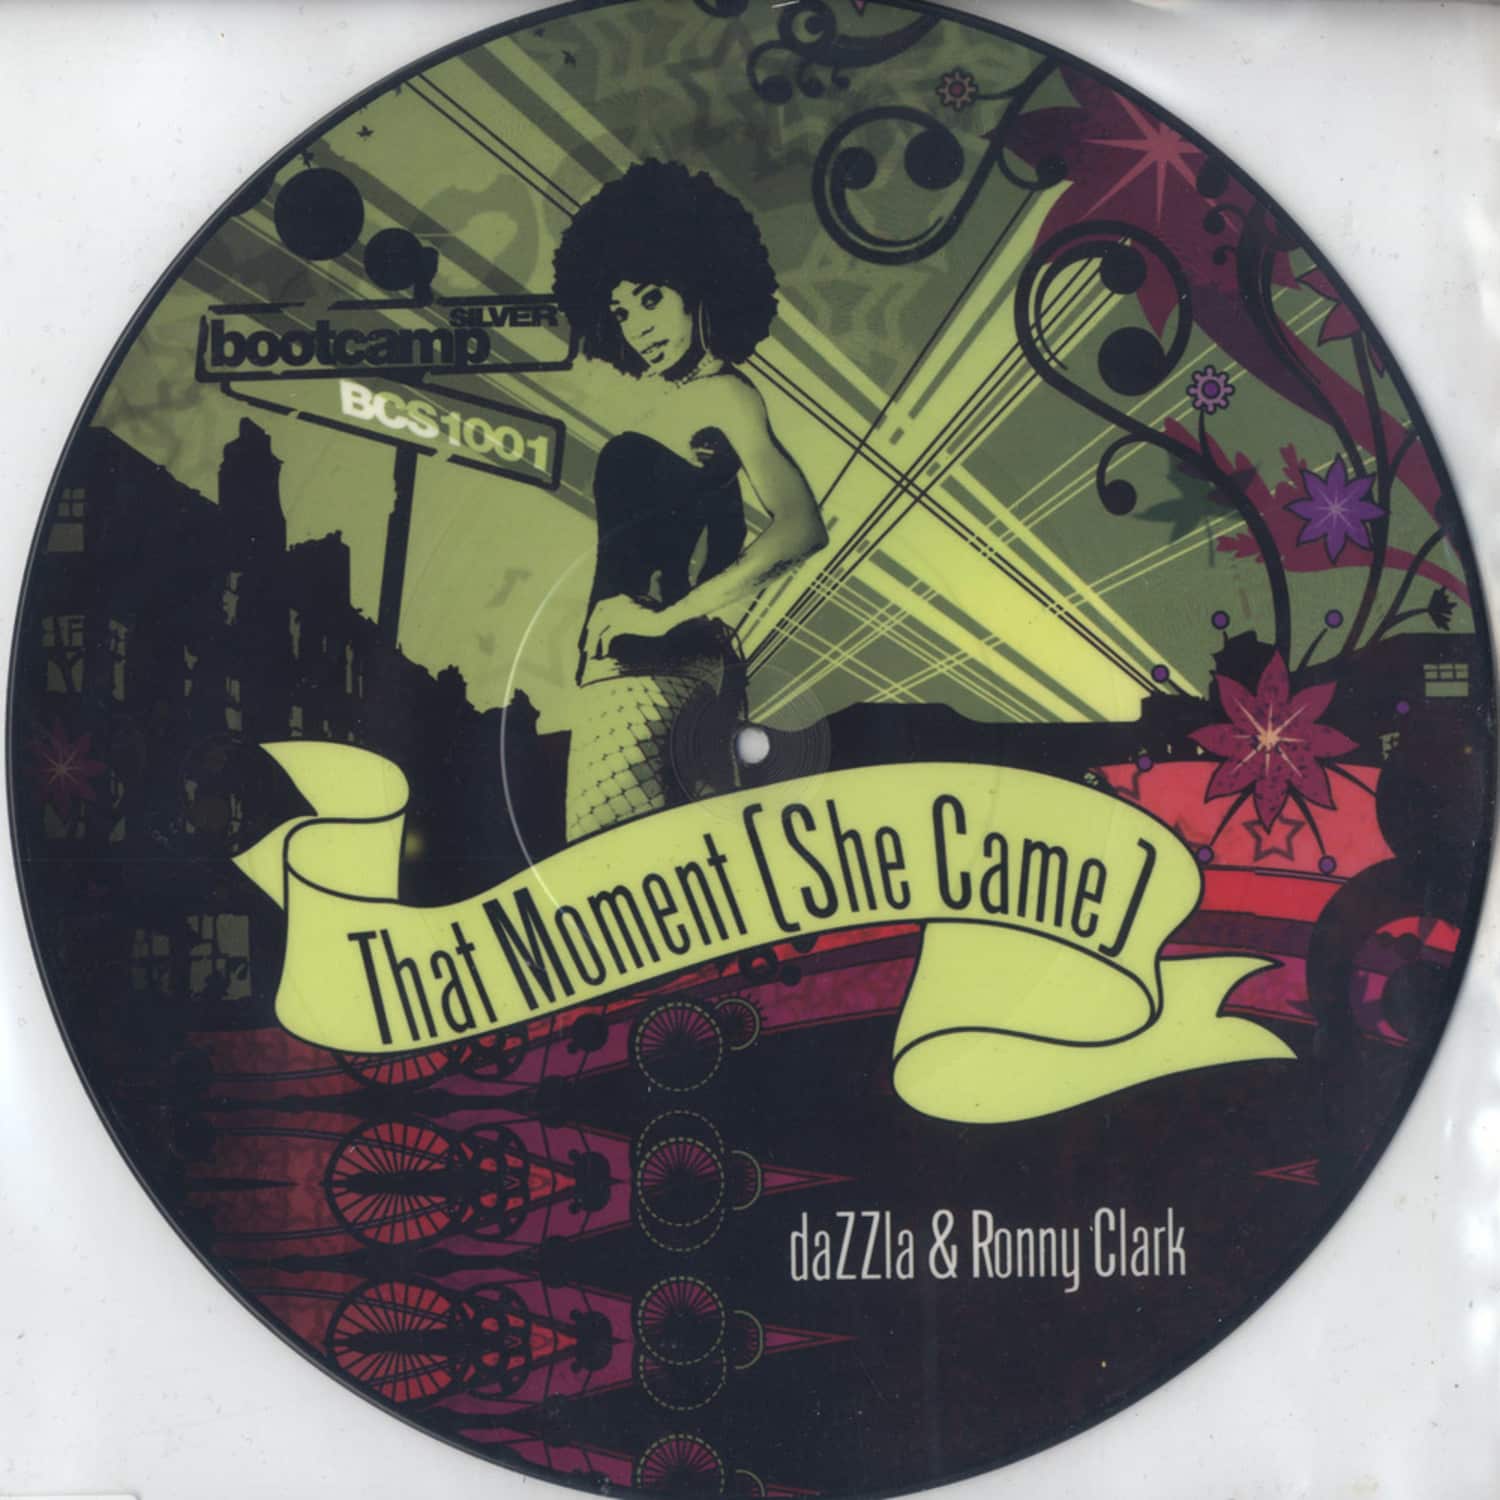 Dazzla & Ronny Clark - THAT MOMENT / SHE CAME 